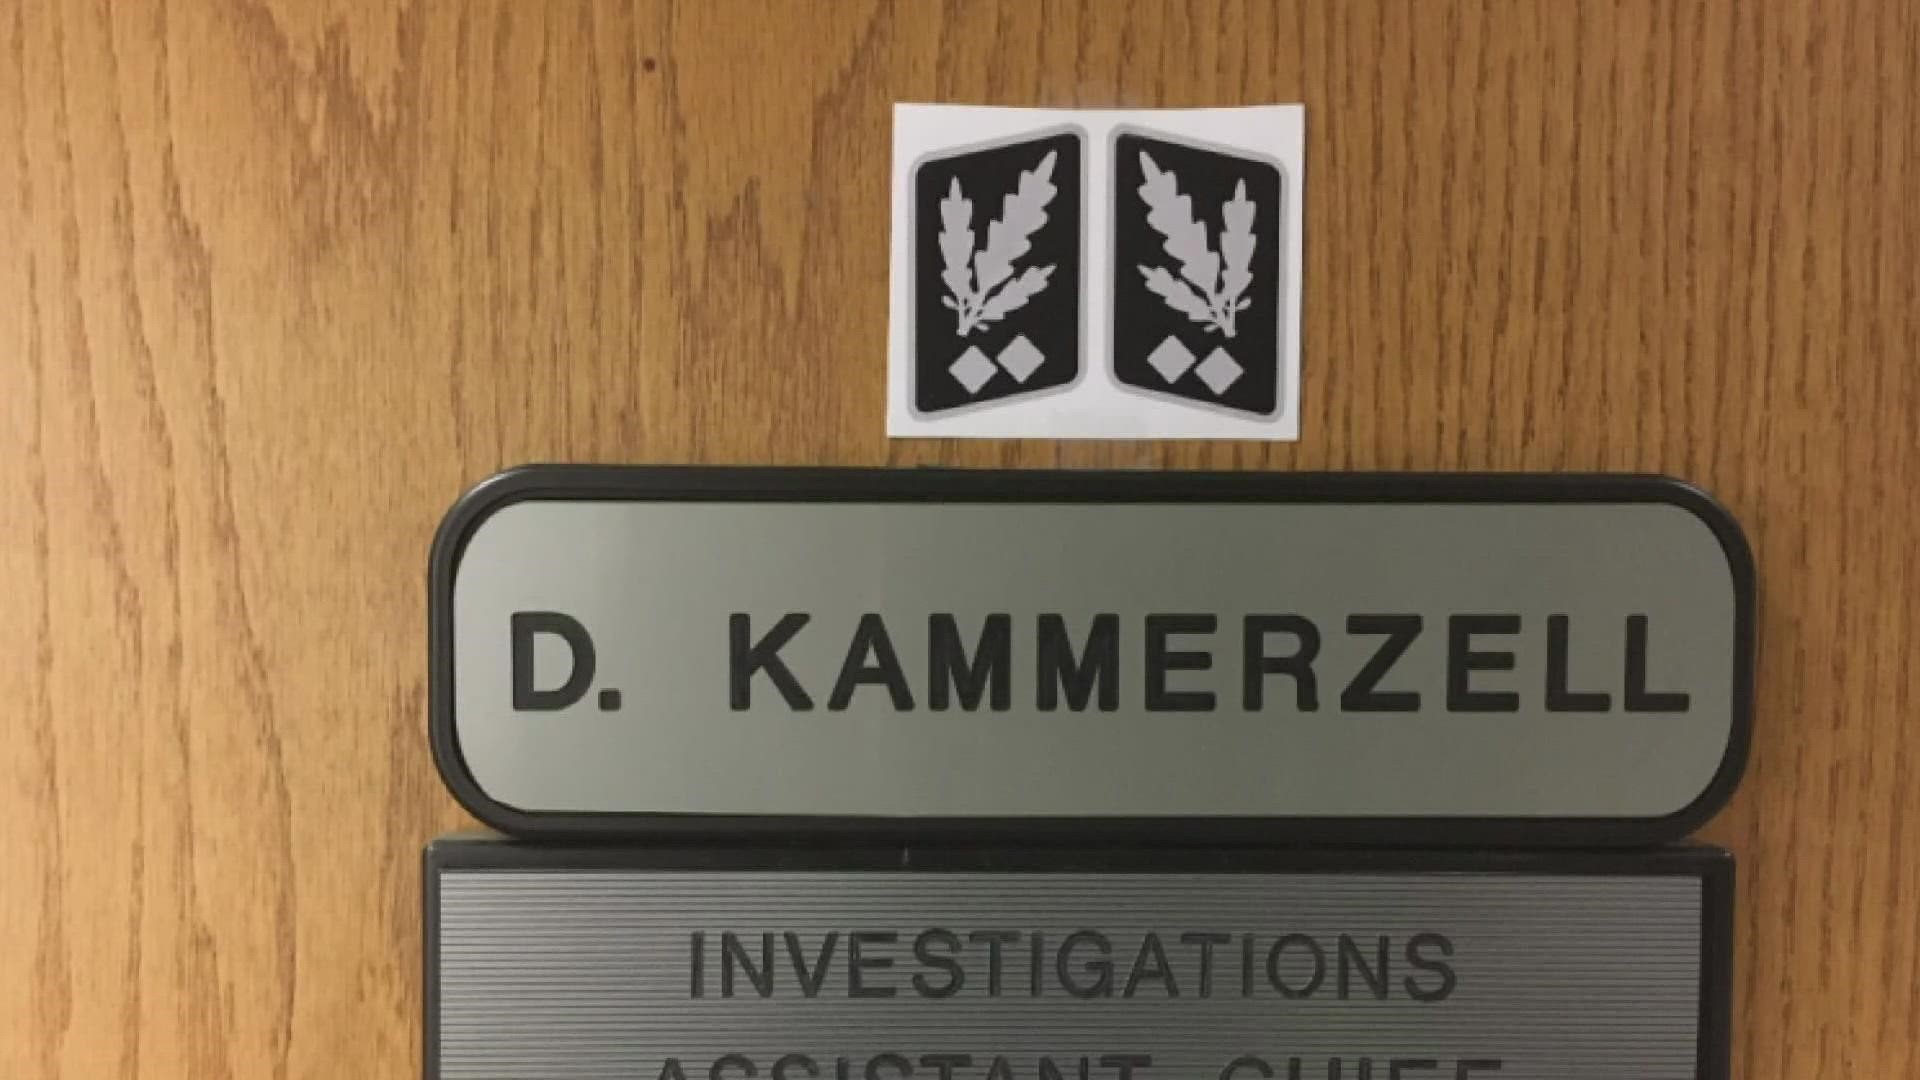 Derek Kammerzell initially had two weeks of vacation time revoked, before public outrage prompted Kent's mayor to call for the former assistant chief's resignation.